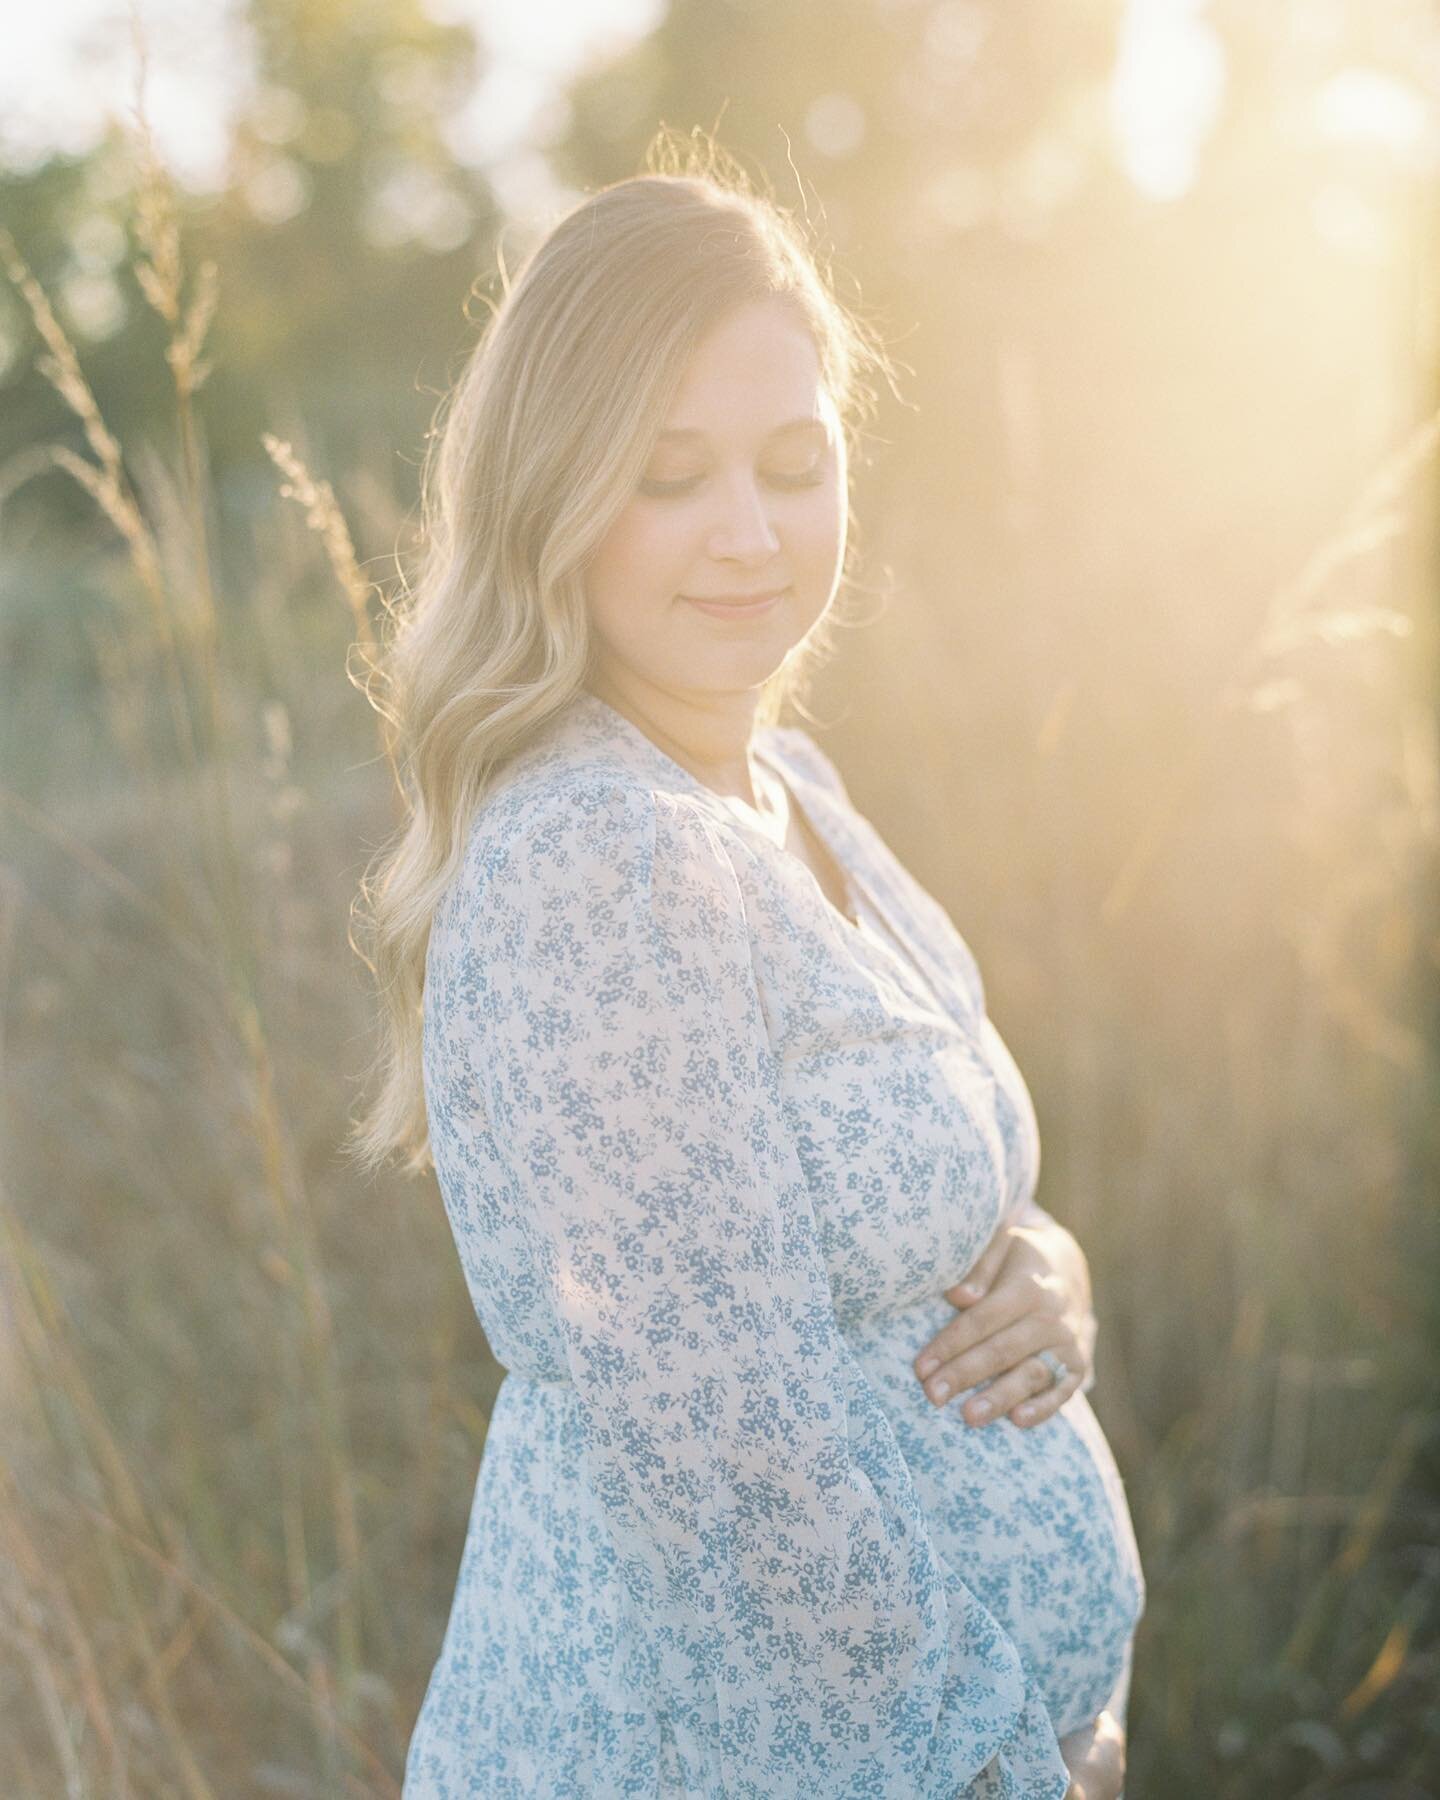 Love this glowy maternity session at the beginning of autumn season ☀️🍂